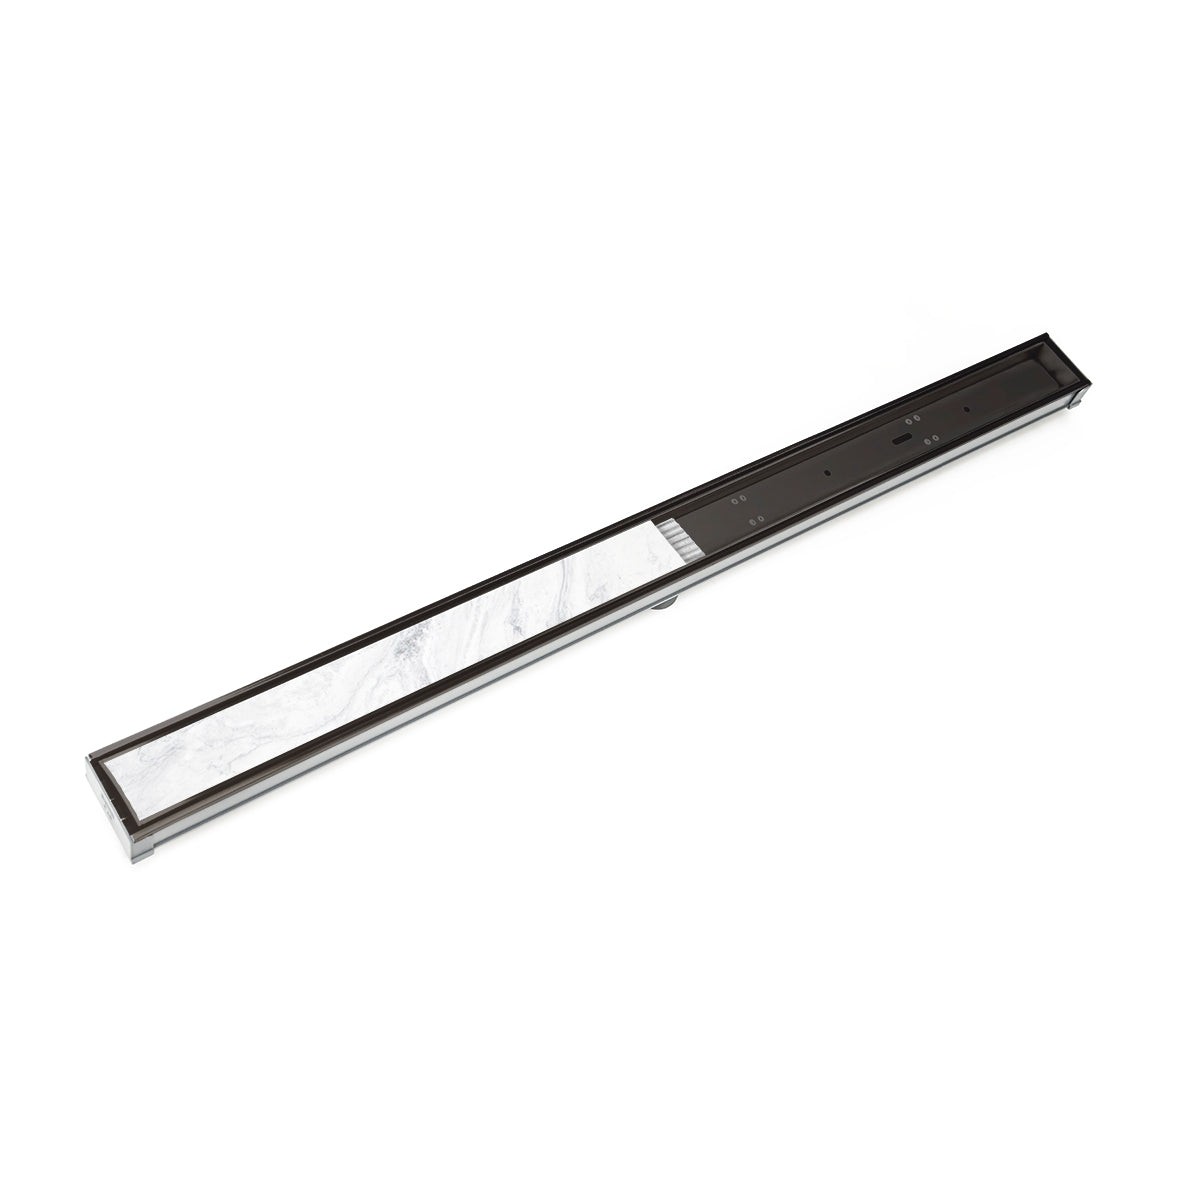 Infinity Drain 36" S-PVC Series Low Profile Site Sizable Linear Drain Kit with 2 1/2" Tile Insert Frame